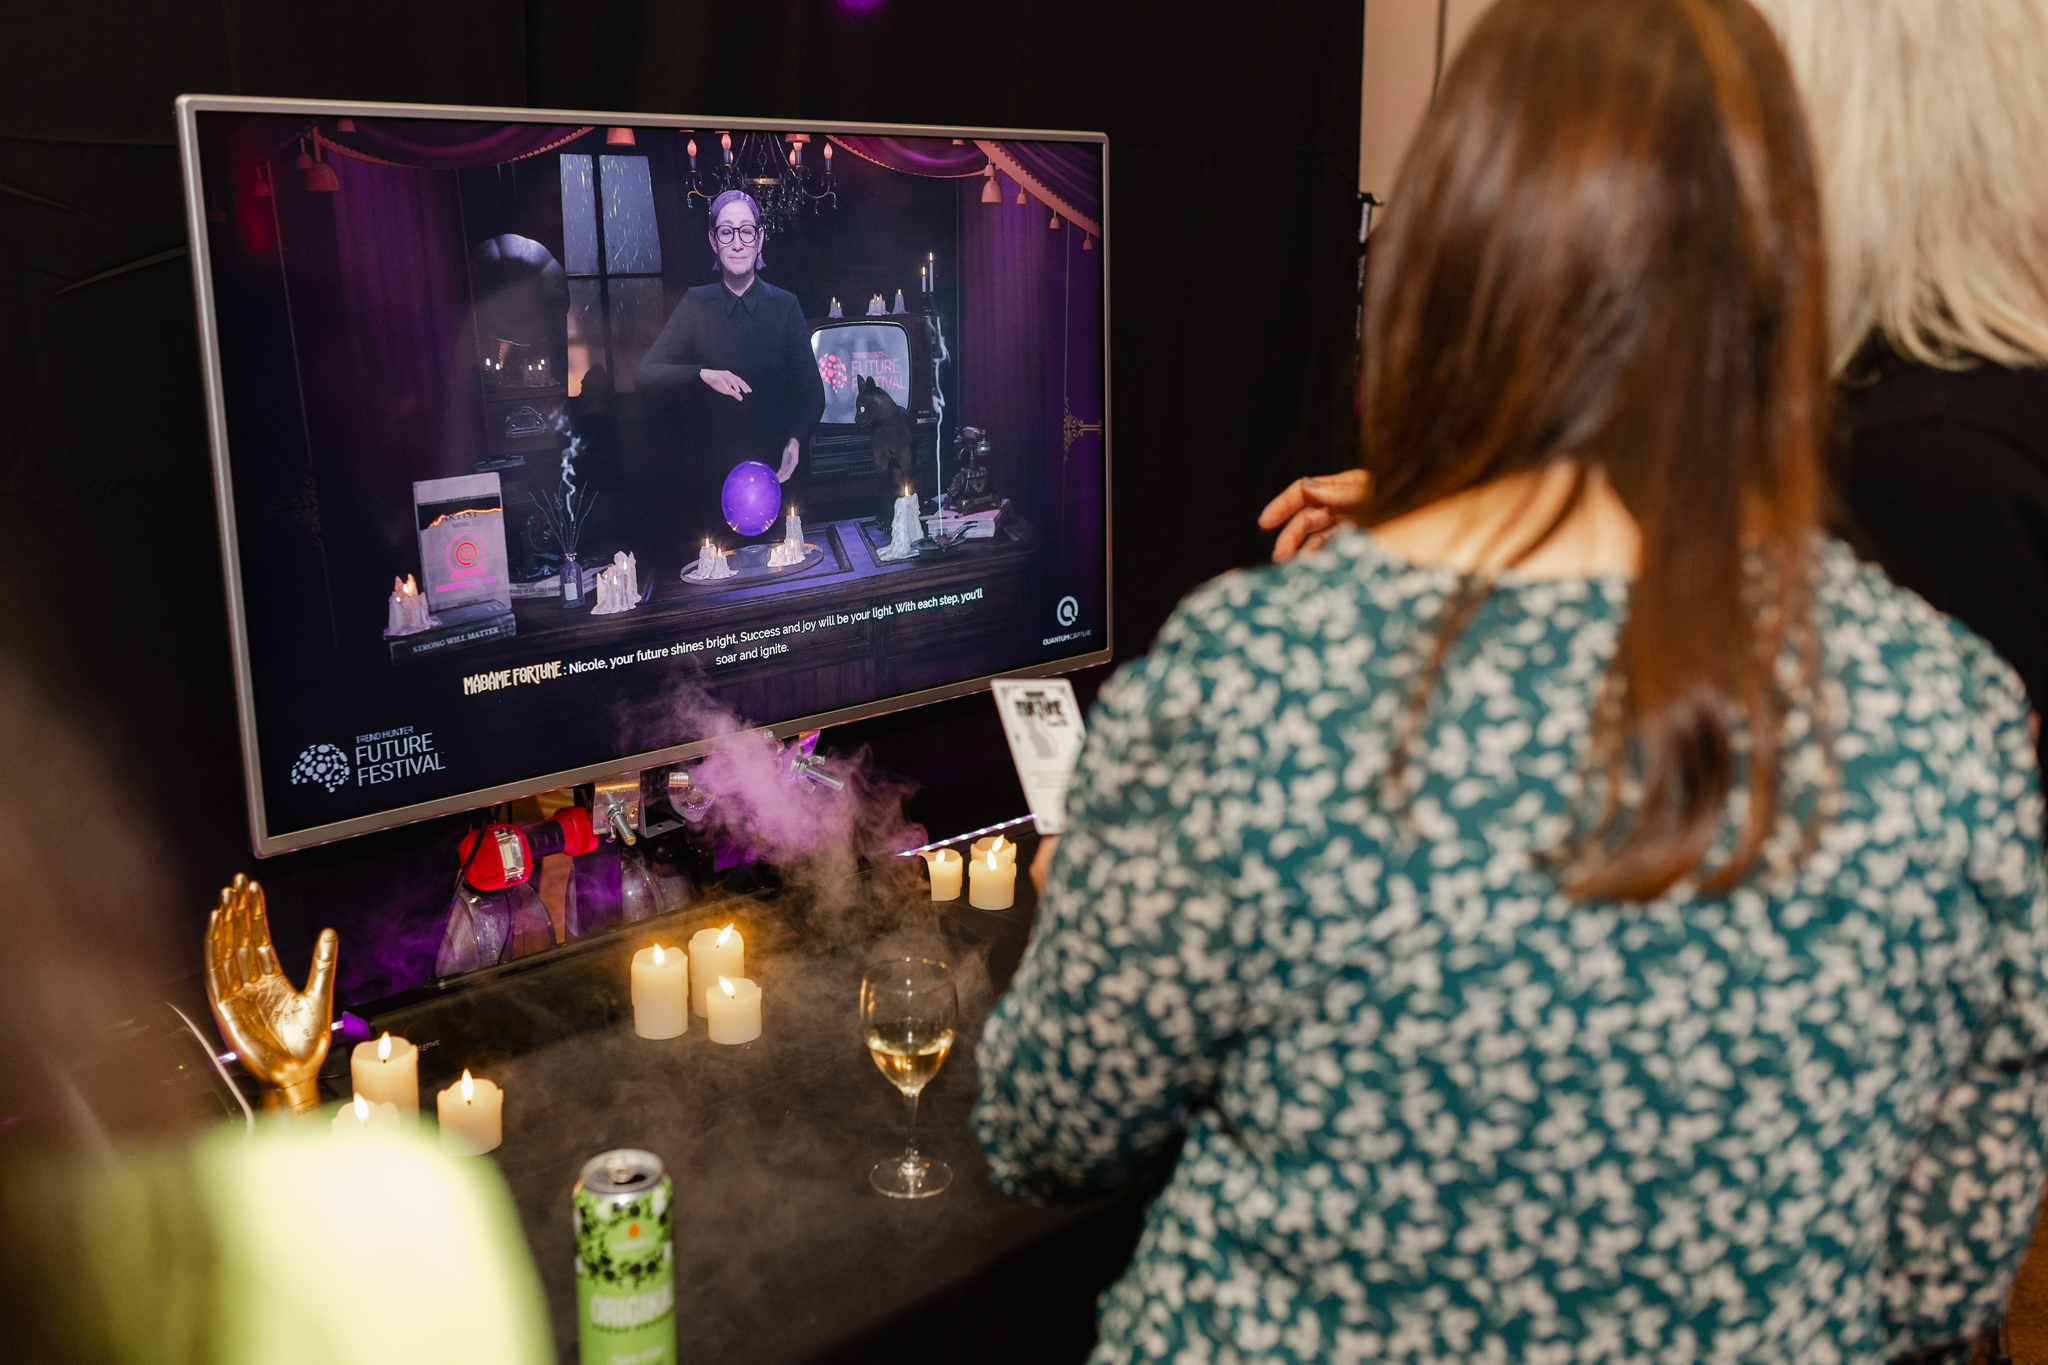 Keywords: event photography

Description: An event photography capturing a group of people gathered around a TV in front of a cozy fireplace, engrossed in the on-screen content.